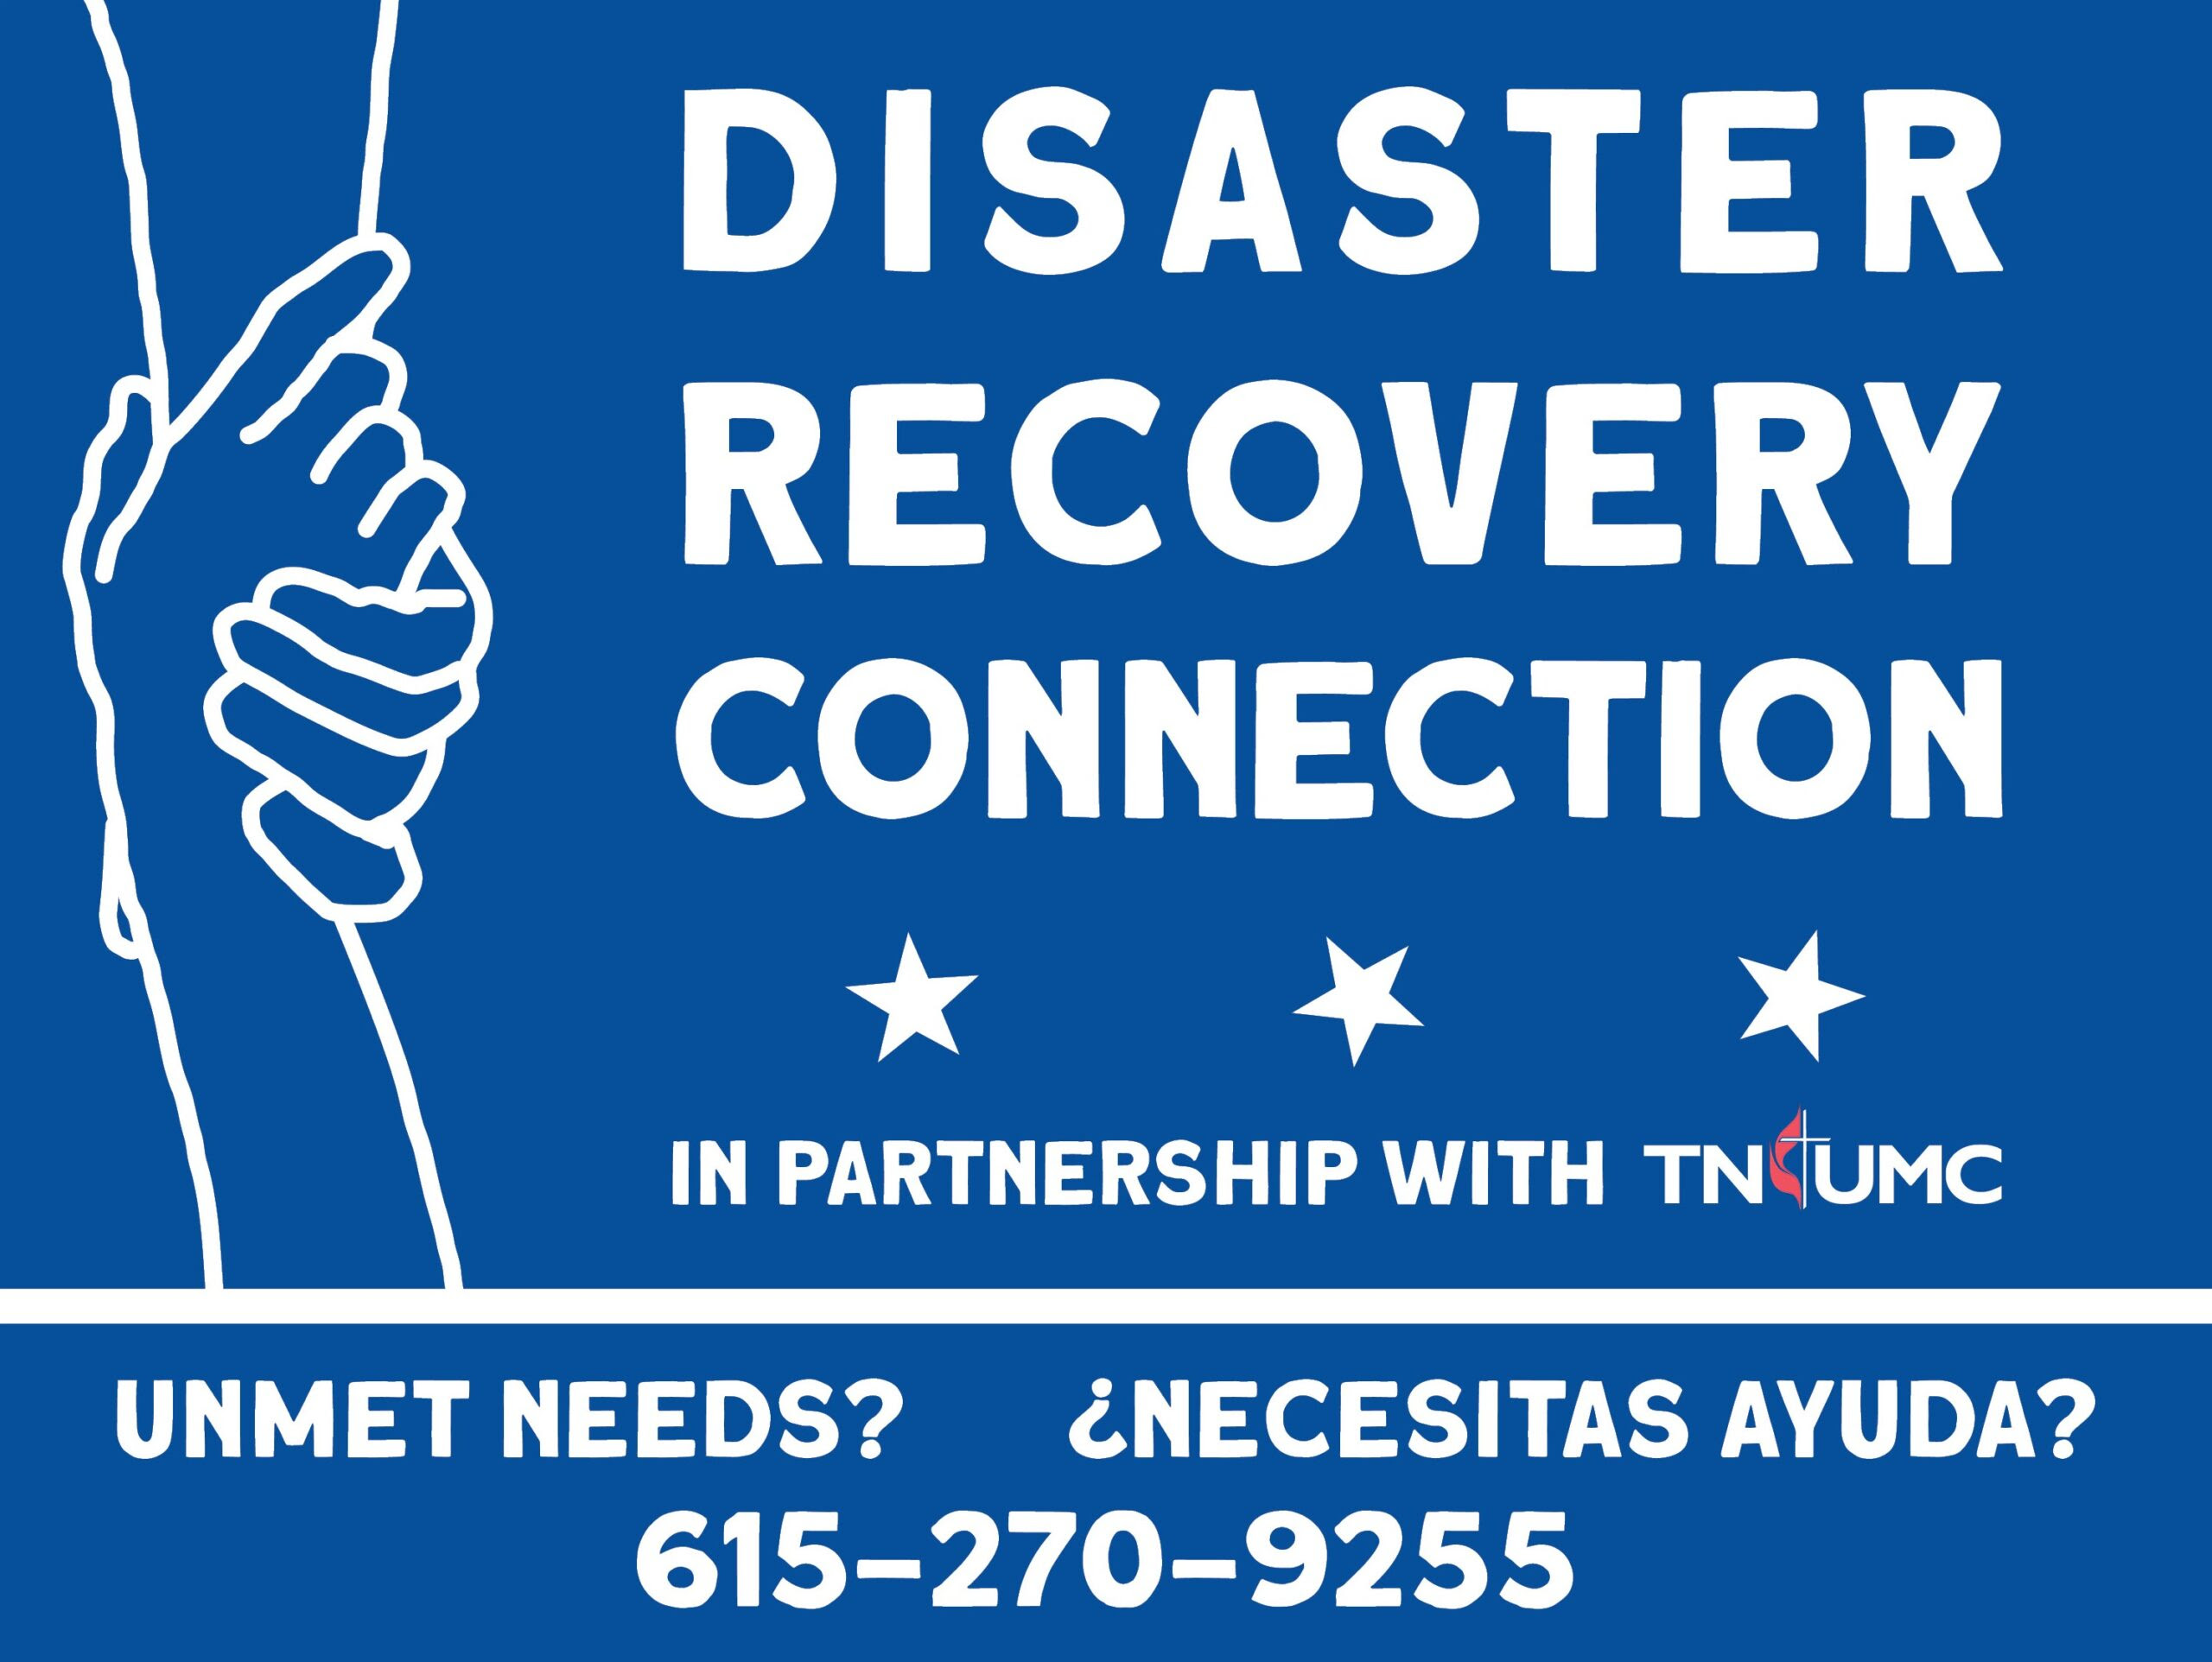 Disaster Recovery Connection logo